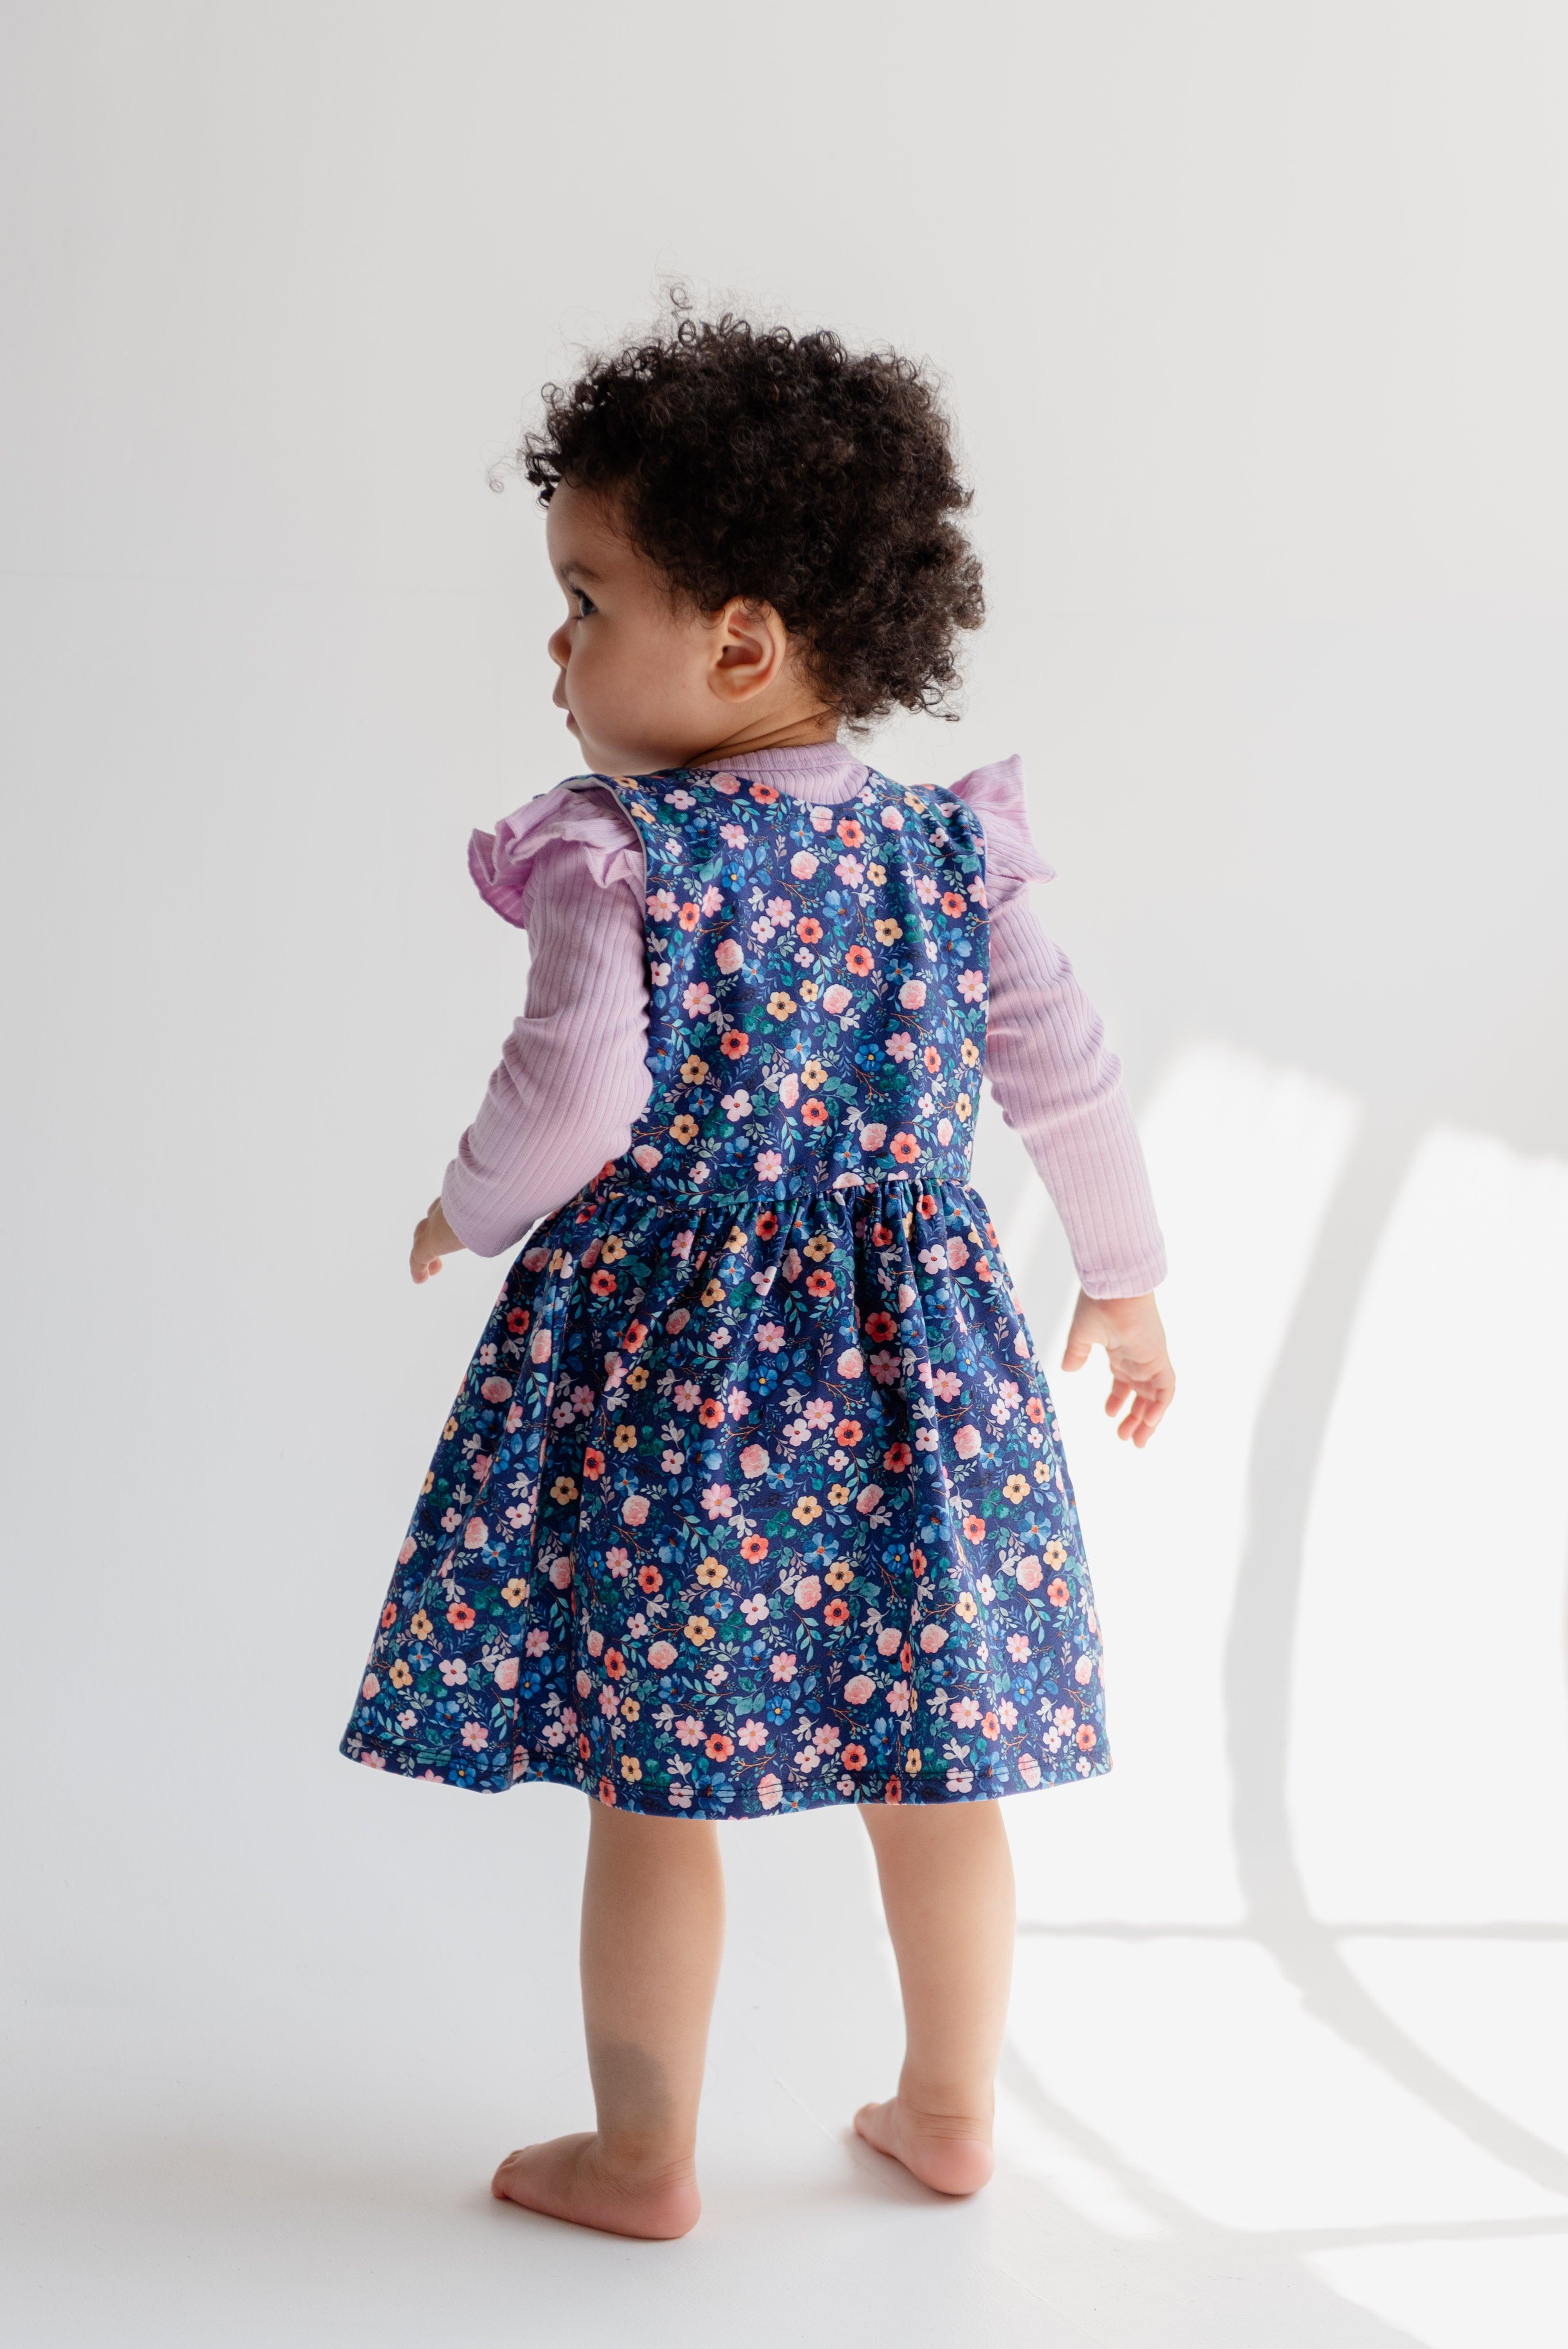 files/navy-dainty-floral-dress-claybearofficial-2.jpg